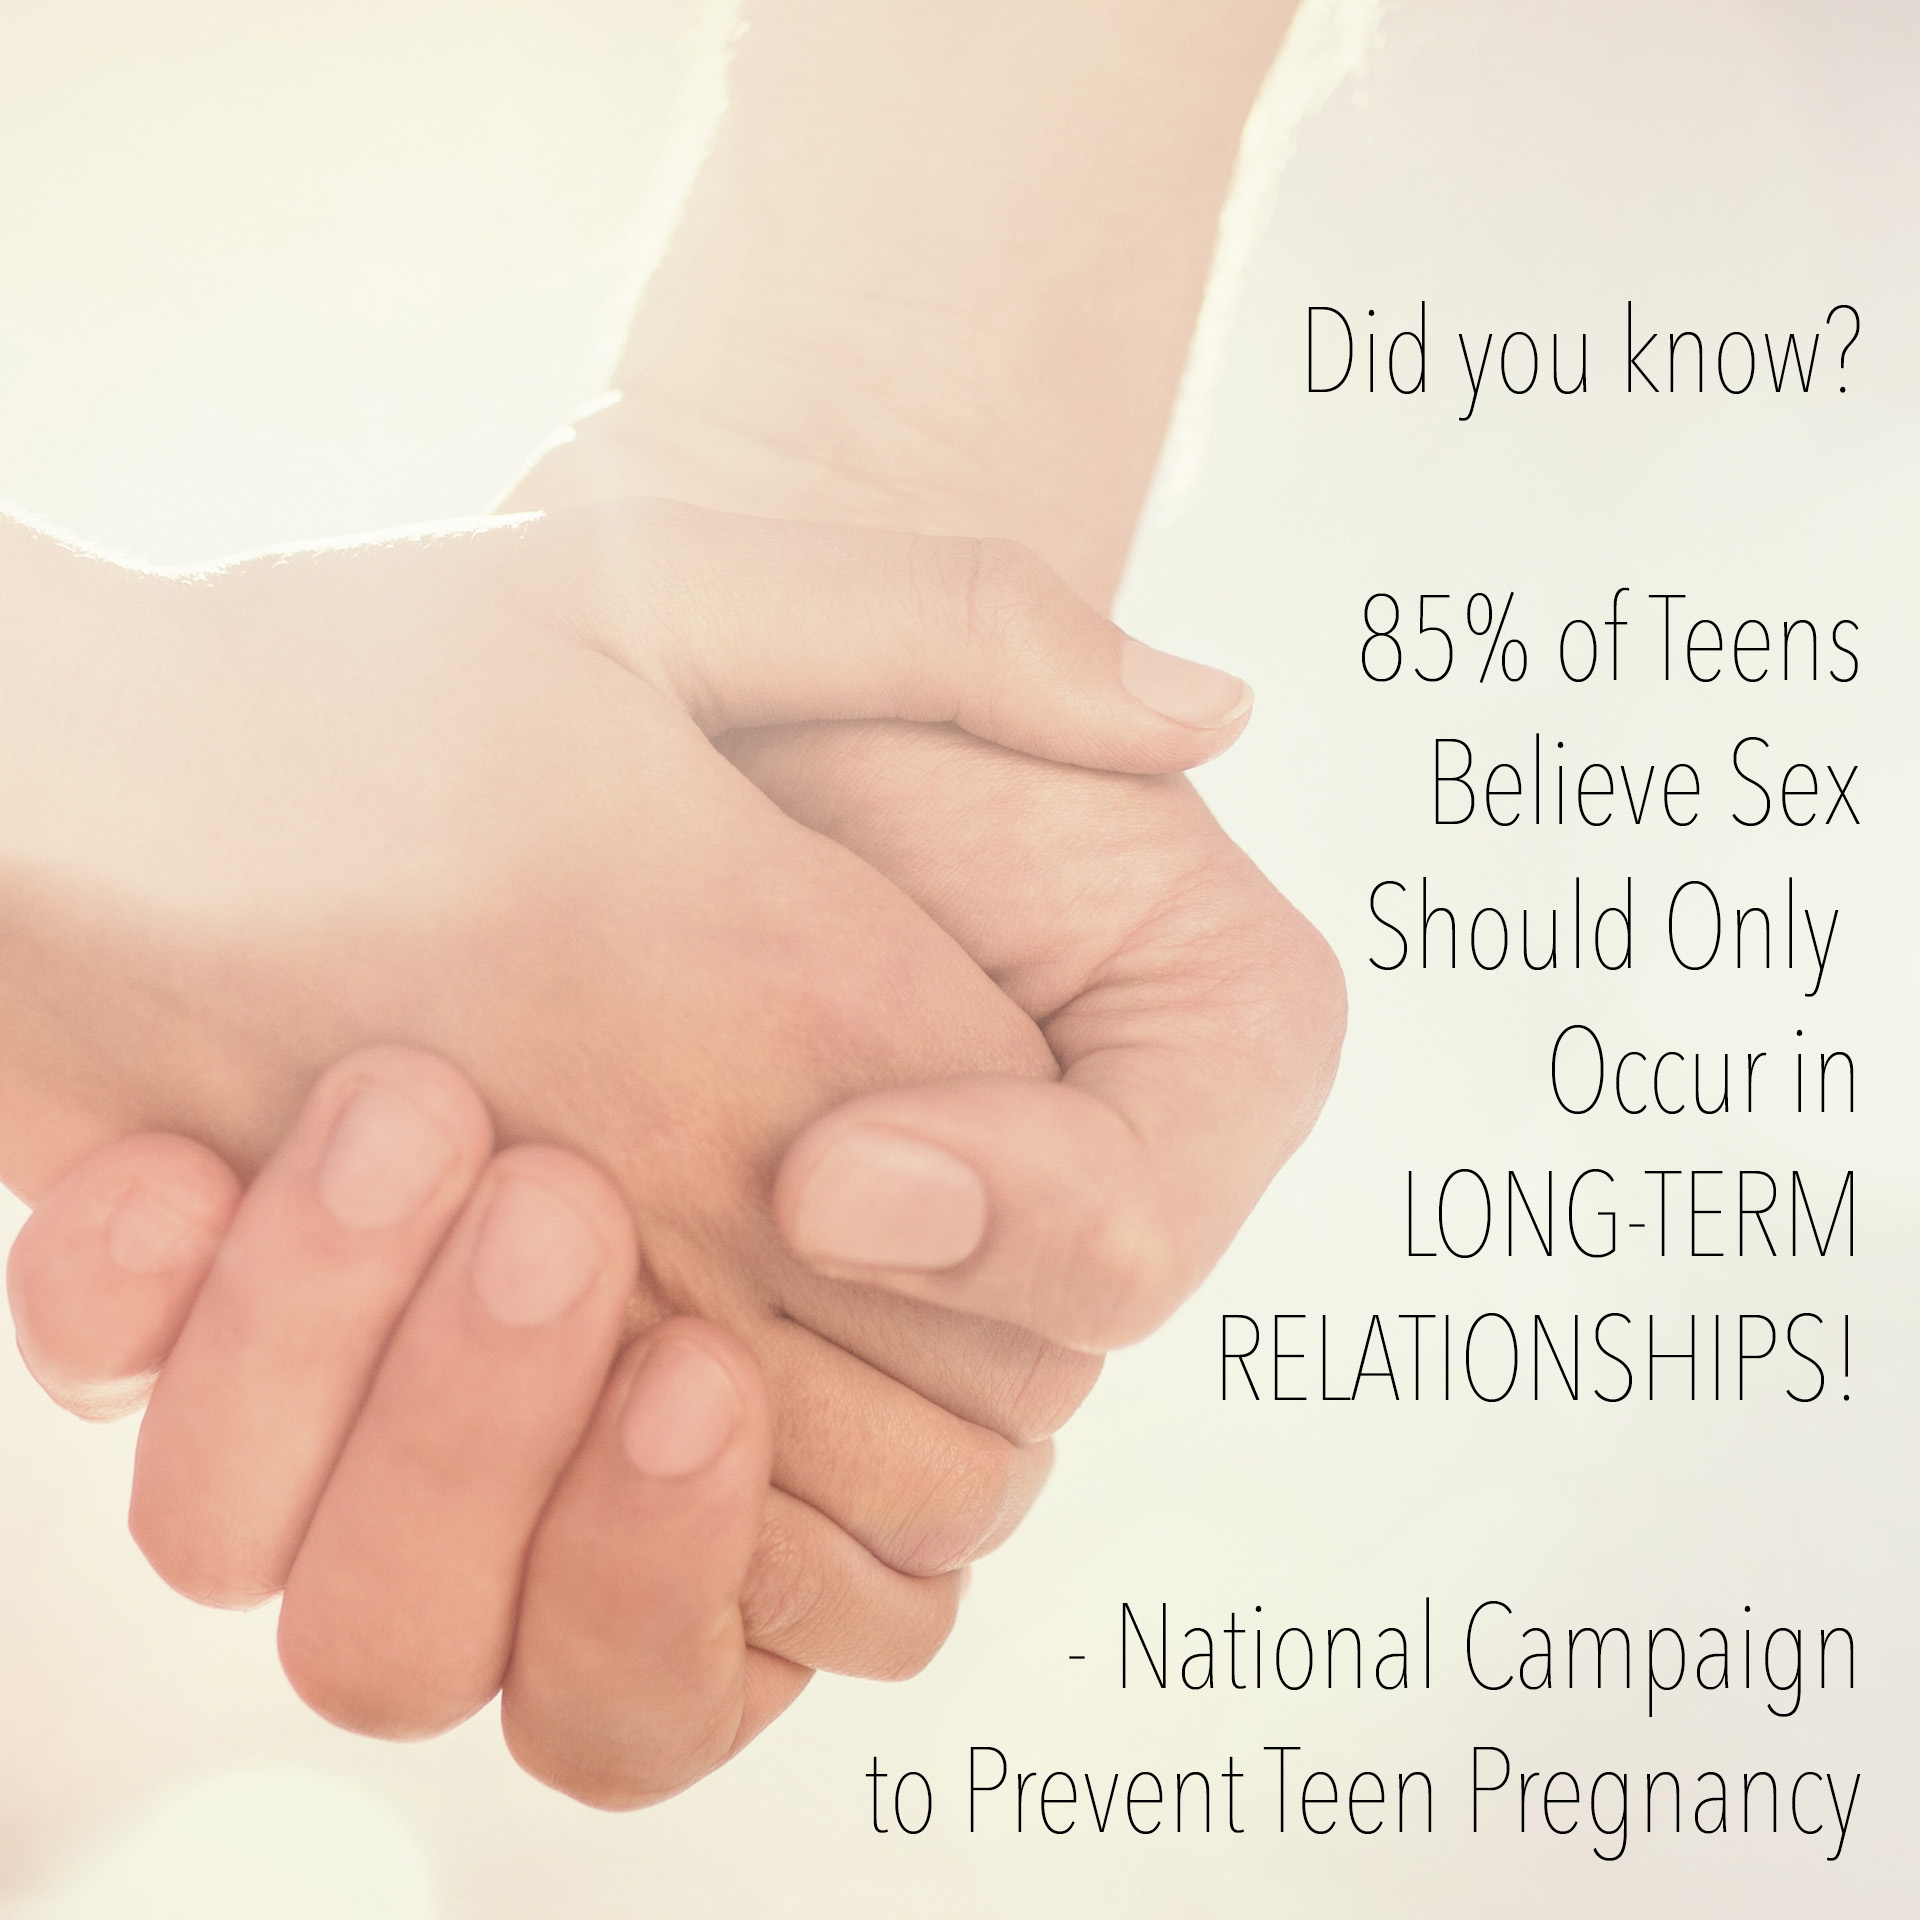 Did you know? 85% of Teens Believe Sex Should Only Occur in LONG-TERM RELATIONSHIPS! - National Campaign to Prevent Teen Pregnancy